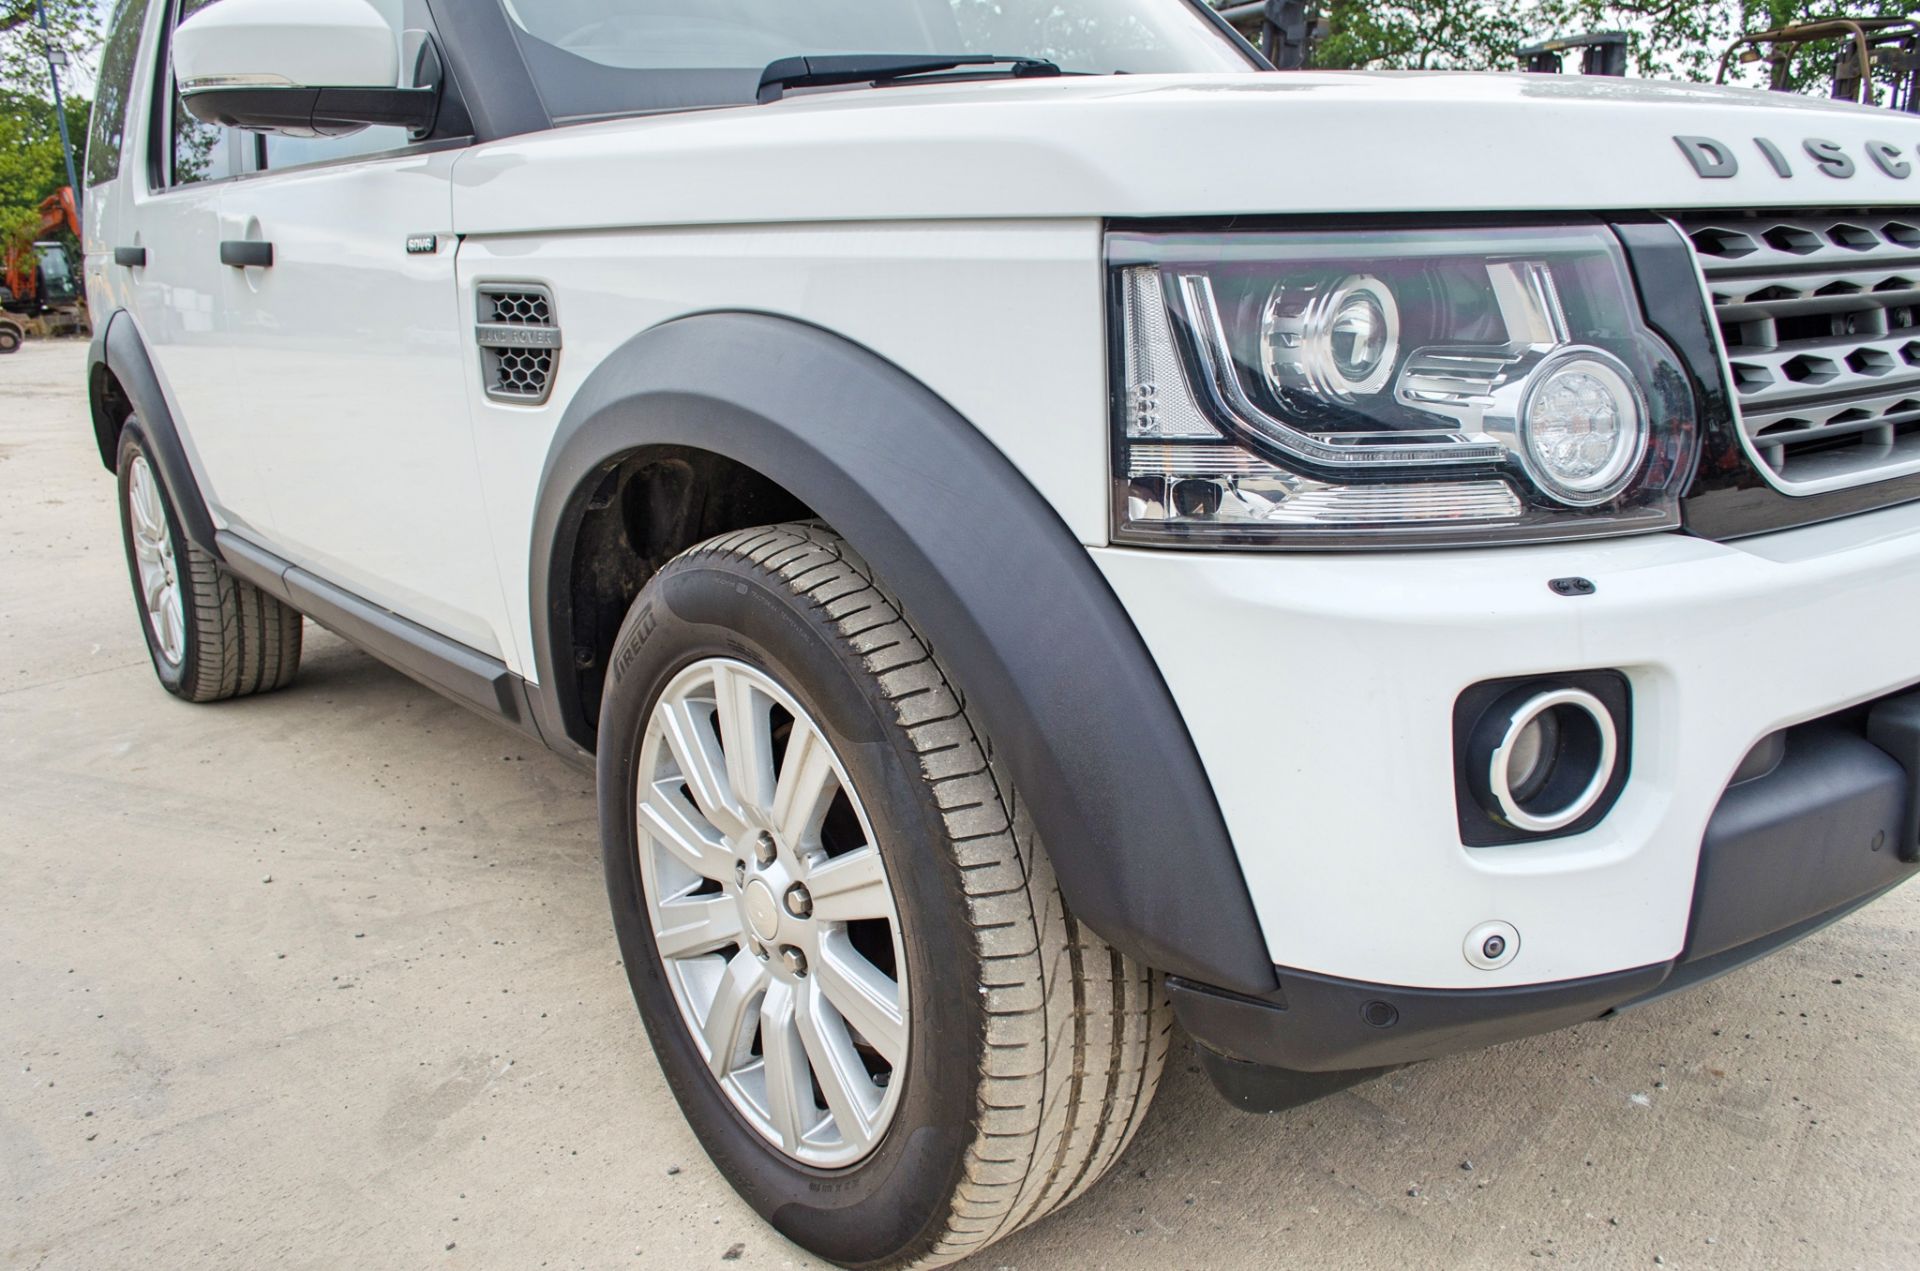 Land Rover Discovery 4 3.0 SDV6 255 XS Commercial 4x4 utility vehicle Registration Number: RV14 - Image 9 of 33